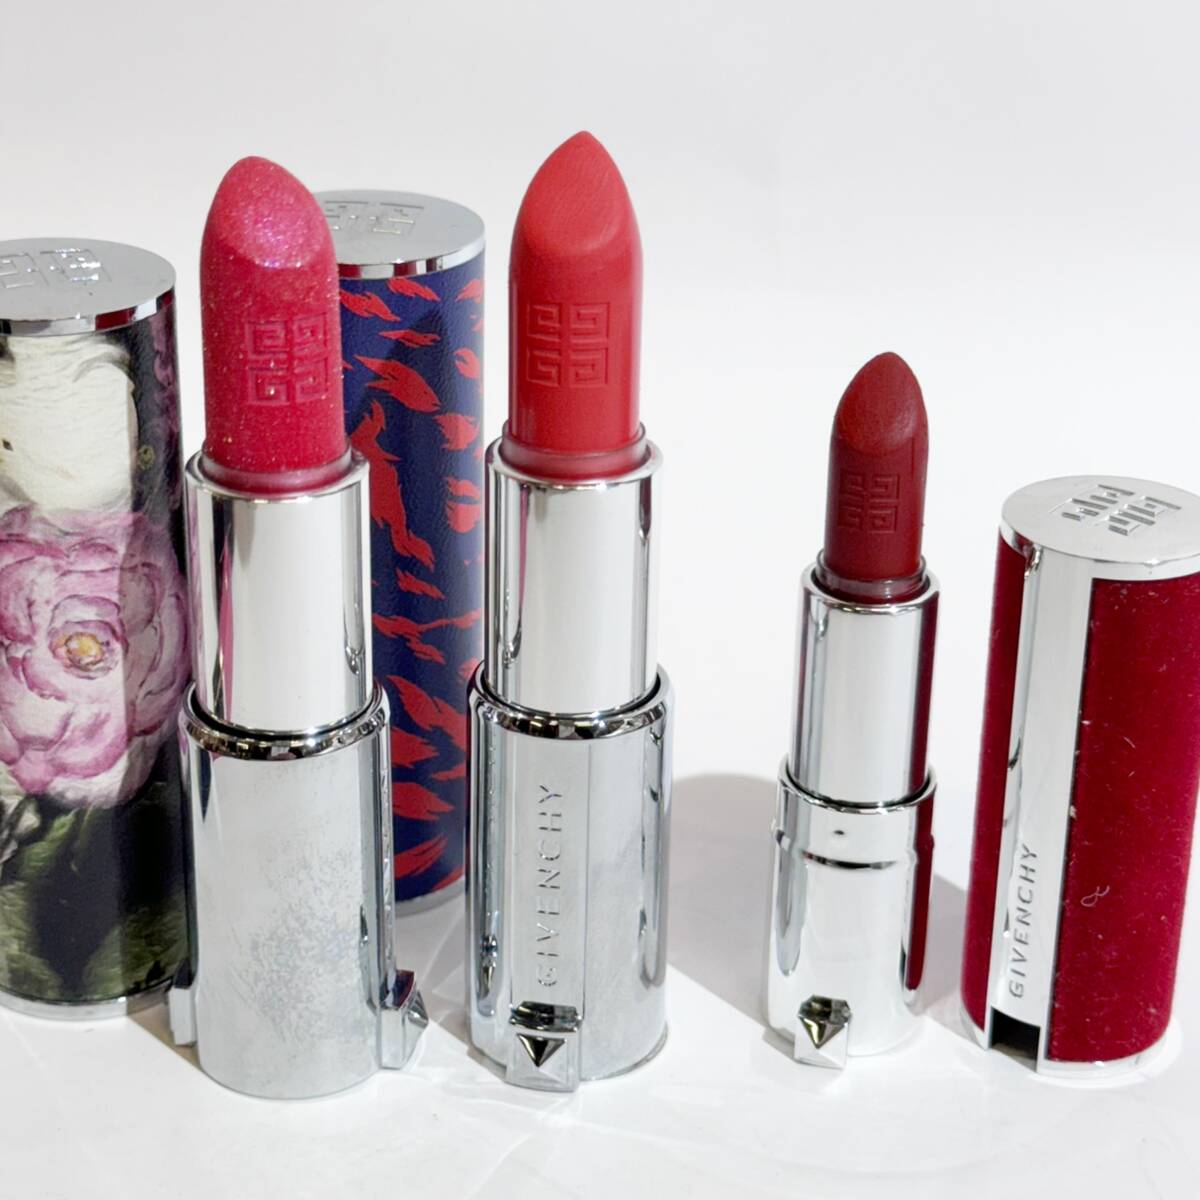 GIVENCHY Givenchy * lipstick, lip gloss 7 pcs set * limited goods equipped * rouge Anne te Rudy, rouge Givenchy etc. 